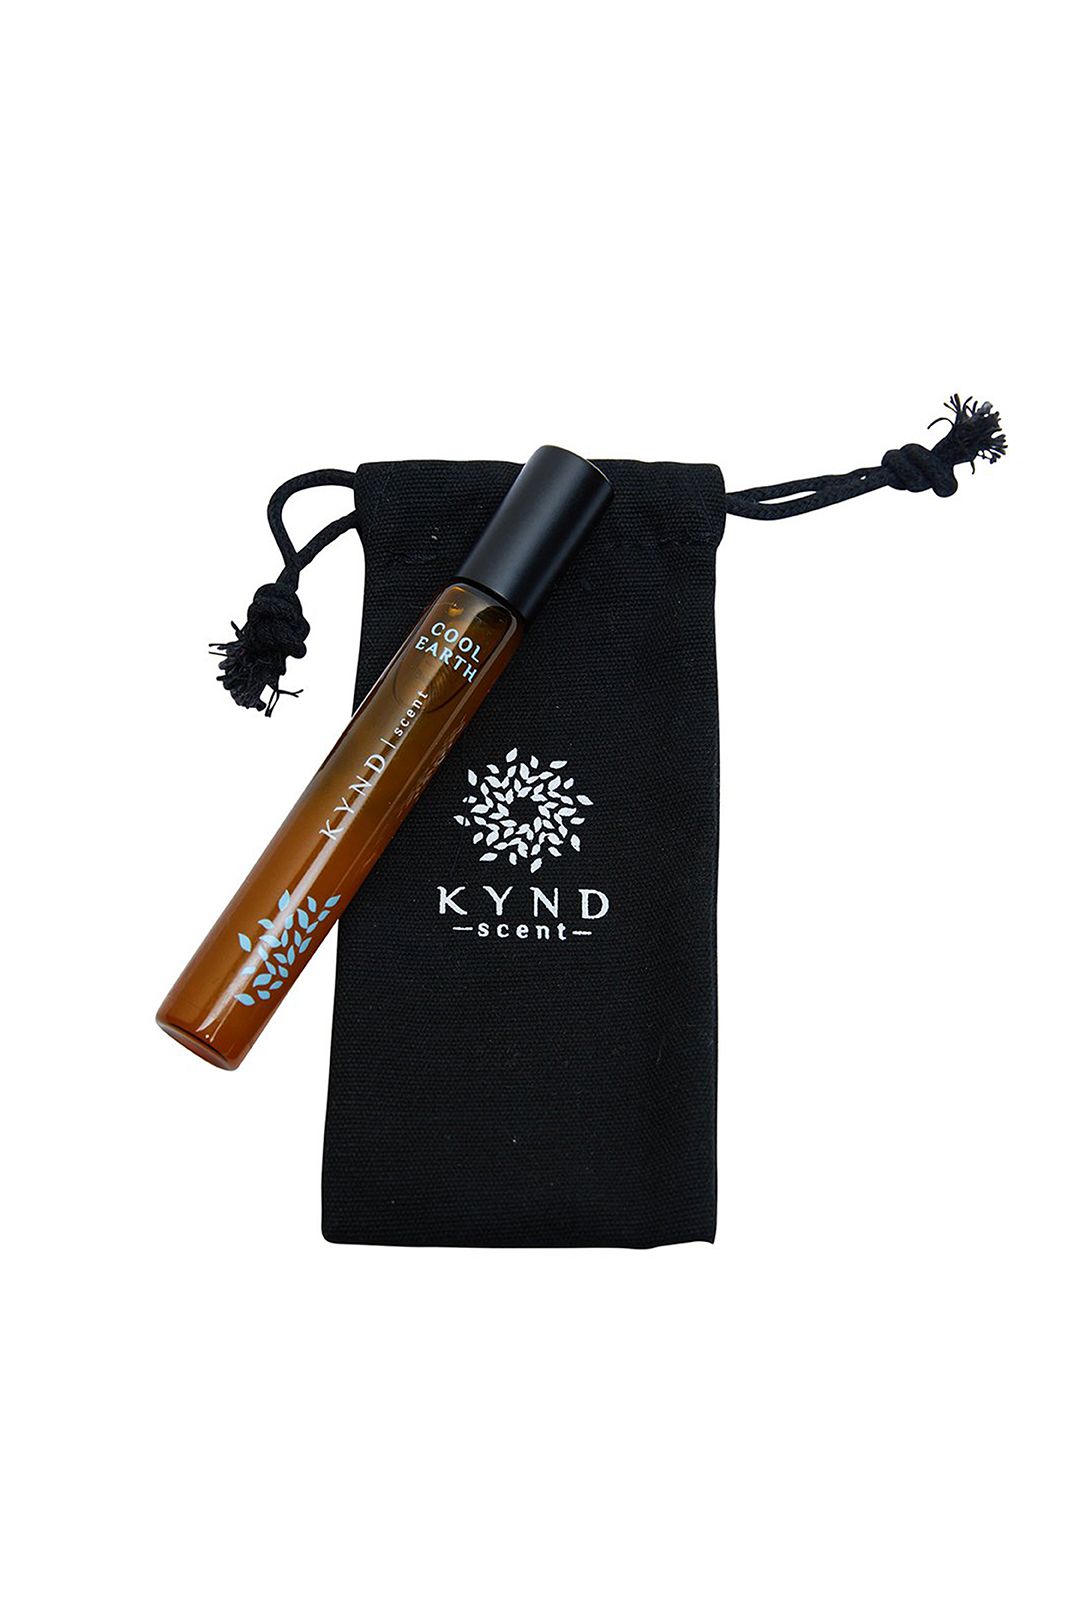 kynd-scent-cool-earth-product-3